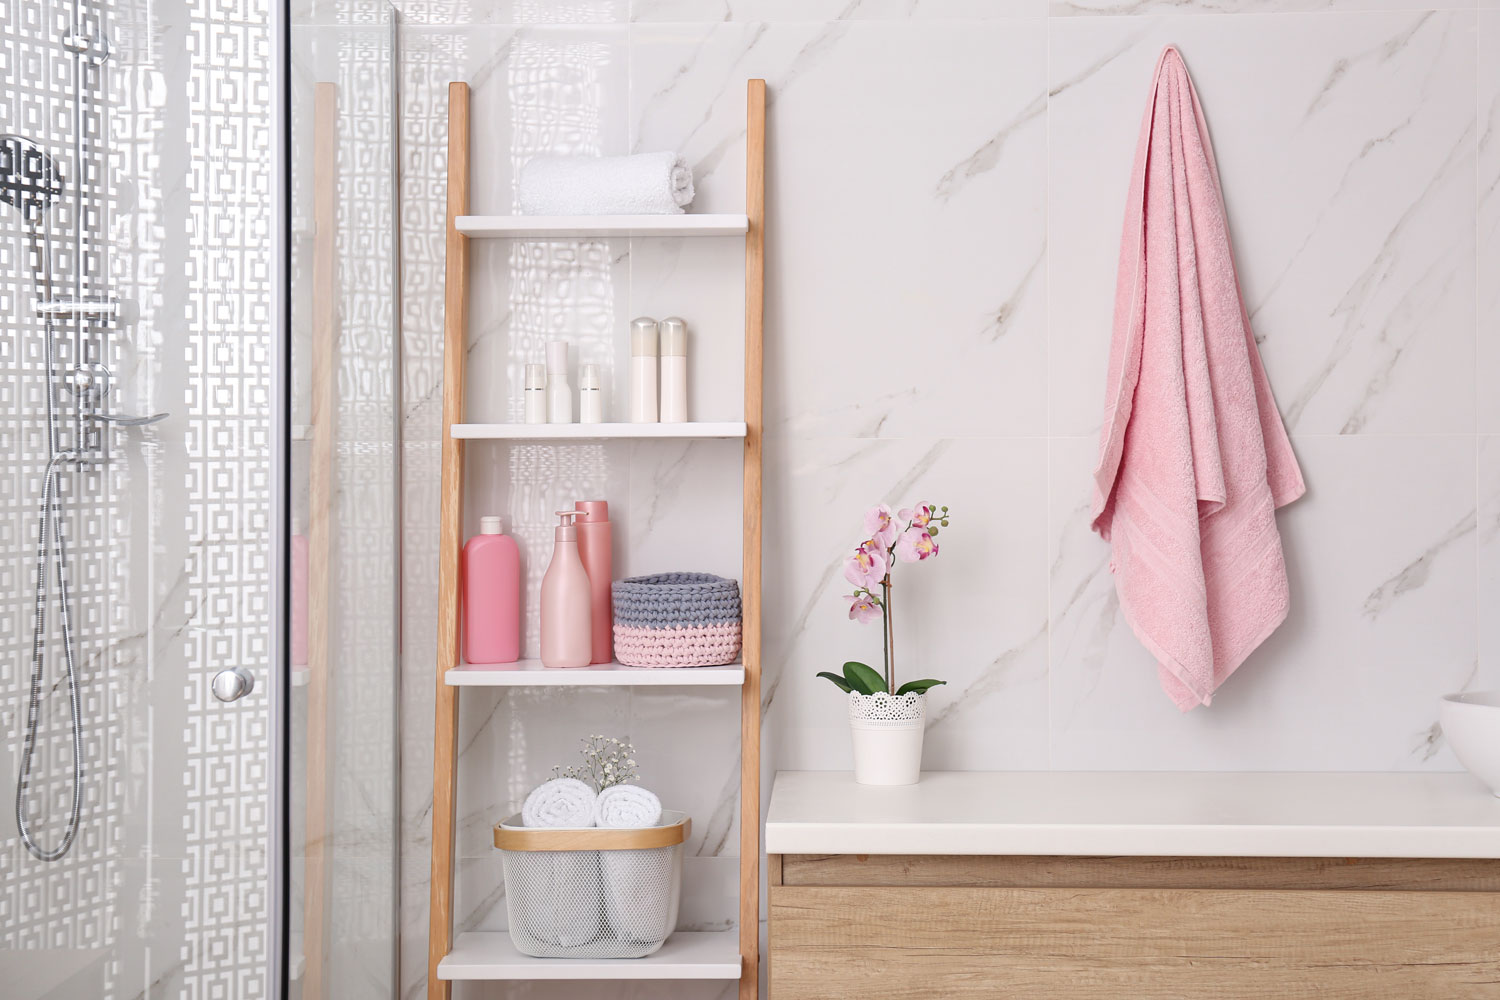 A pink towel hanged inside a boho themed bathroom with a ladder divider